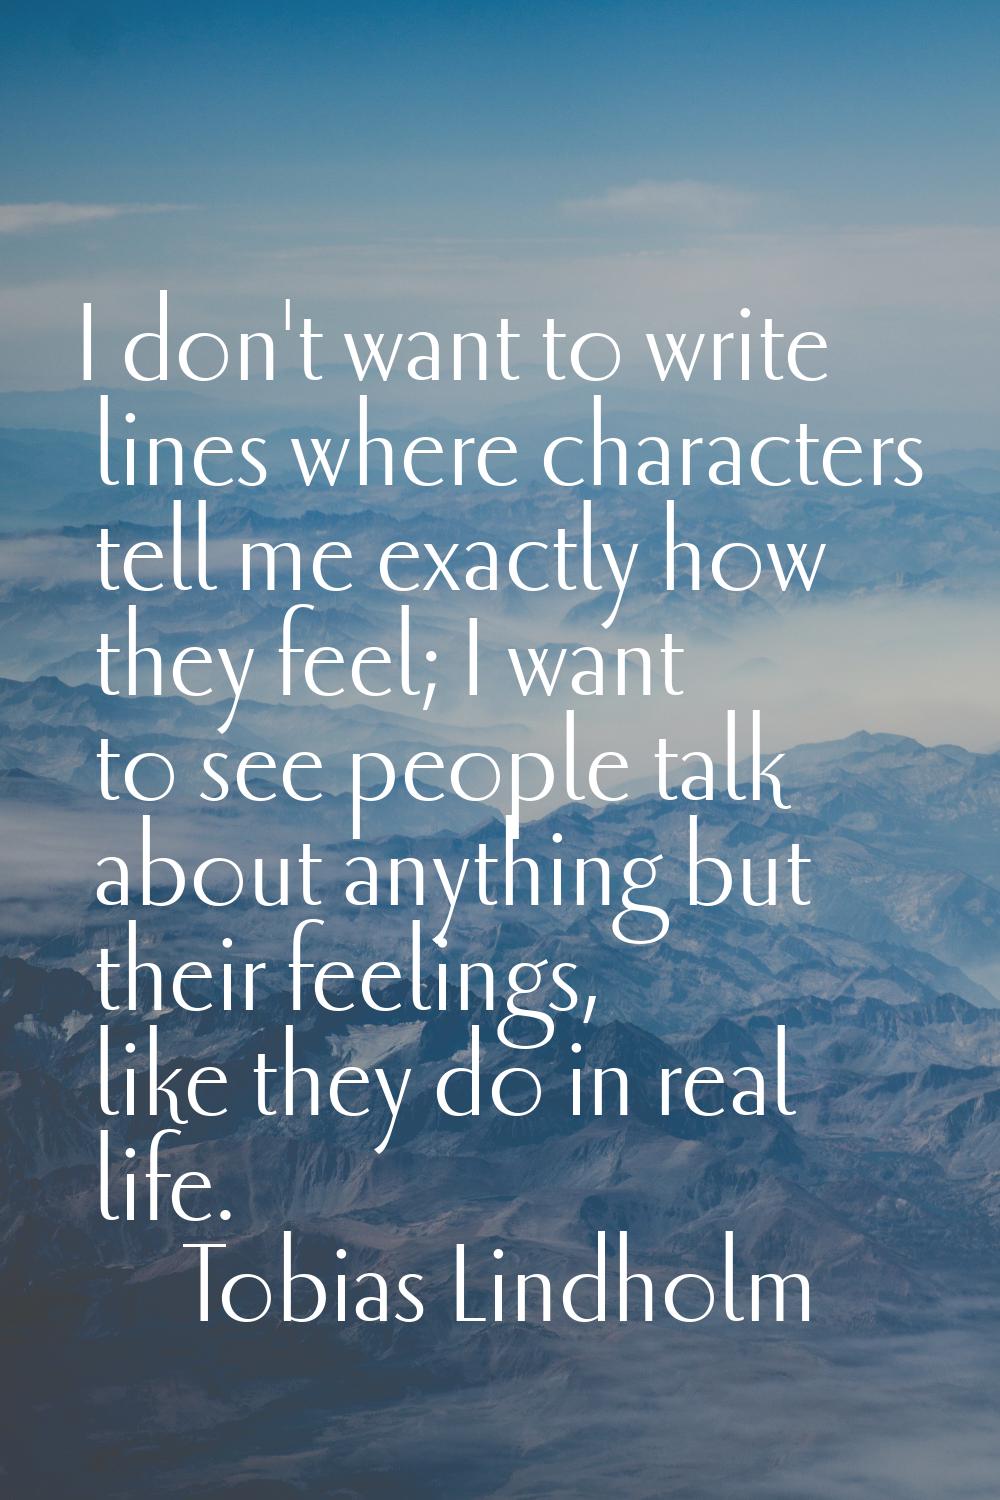 I don't want to write lines where characters tell me exactly how they feel; I want to see people ta